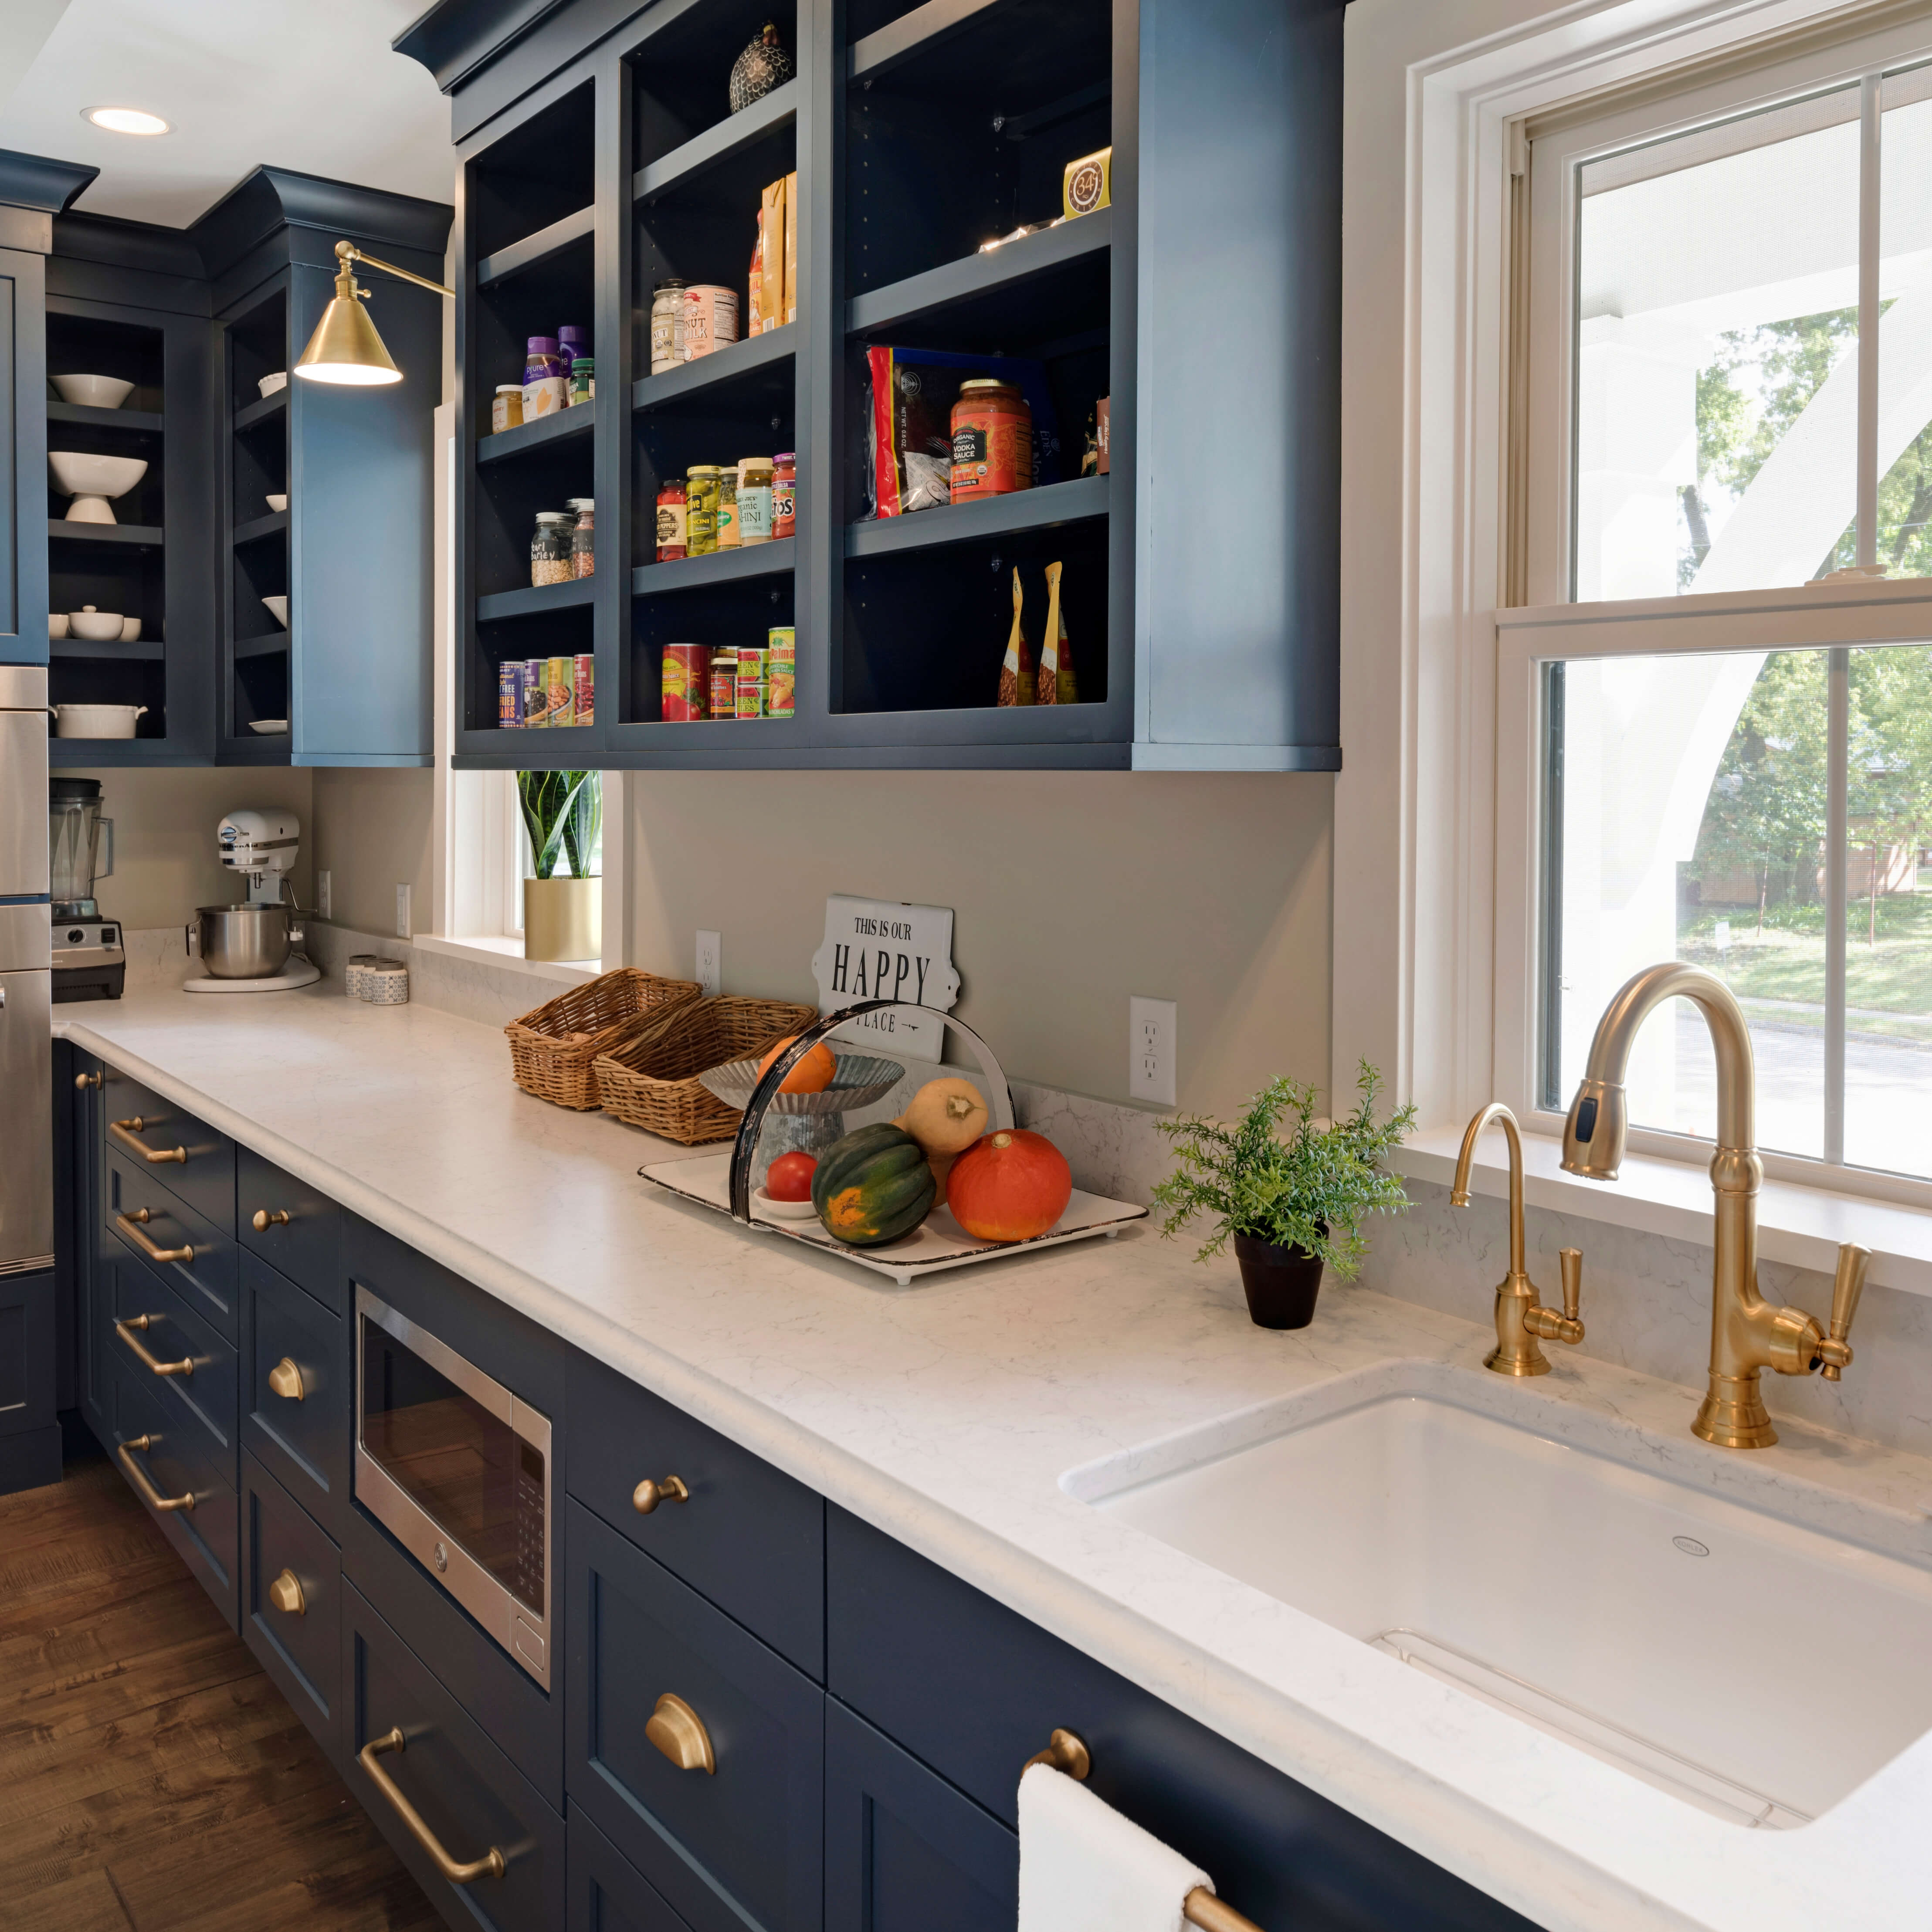 A nautical style butler's pantry with dark navy blue painted cabinets and brass hardware and fixtures.